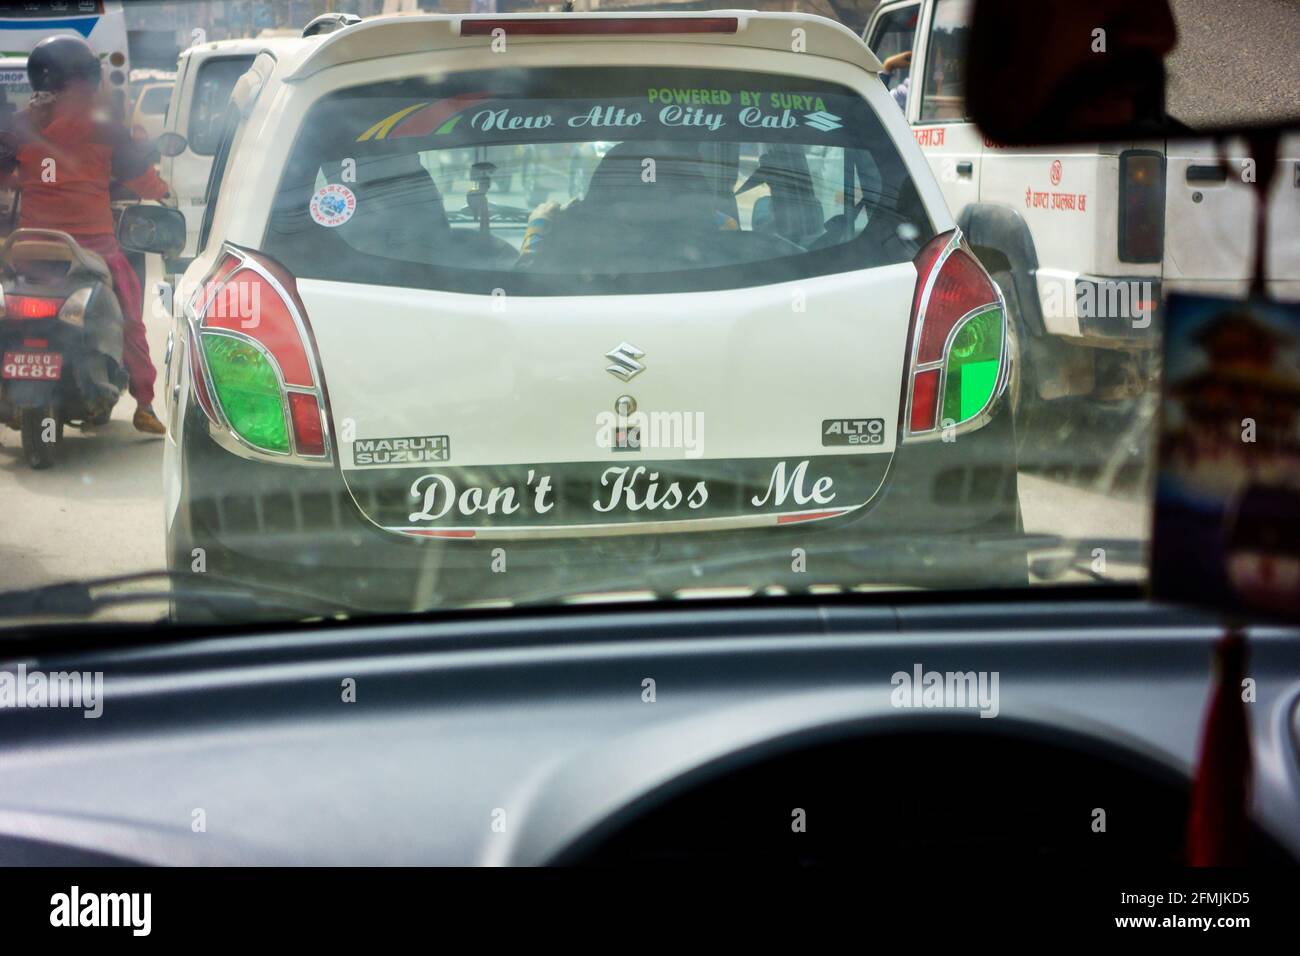 Don't kiss me message on the back of taxi in Kathmandu, Nepal Stock Photo